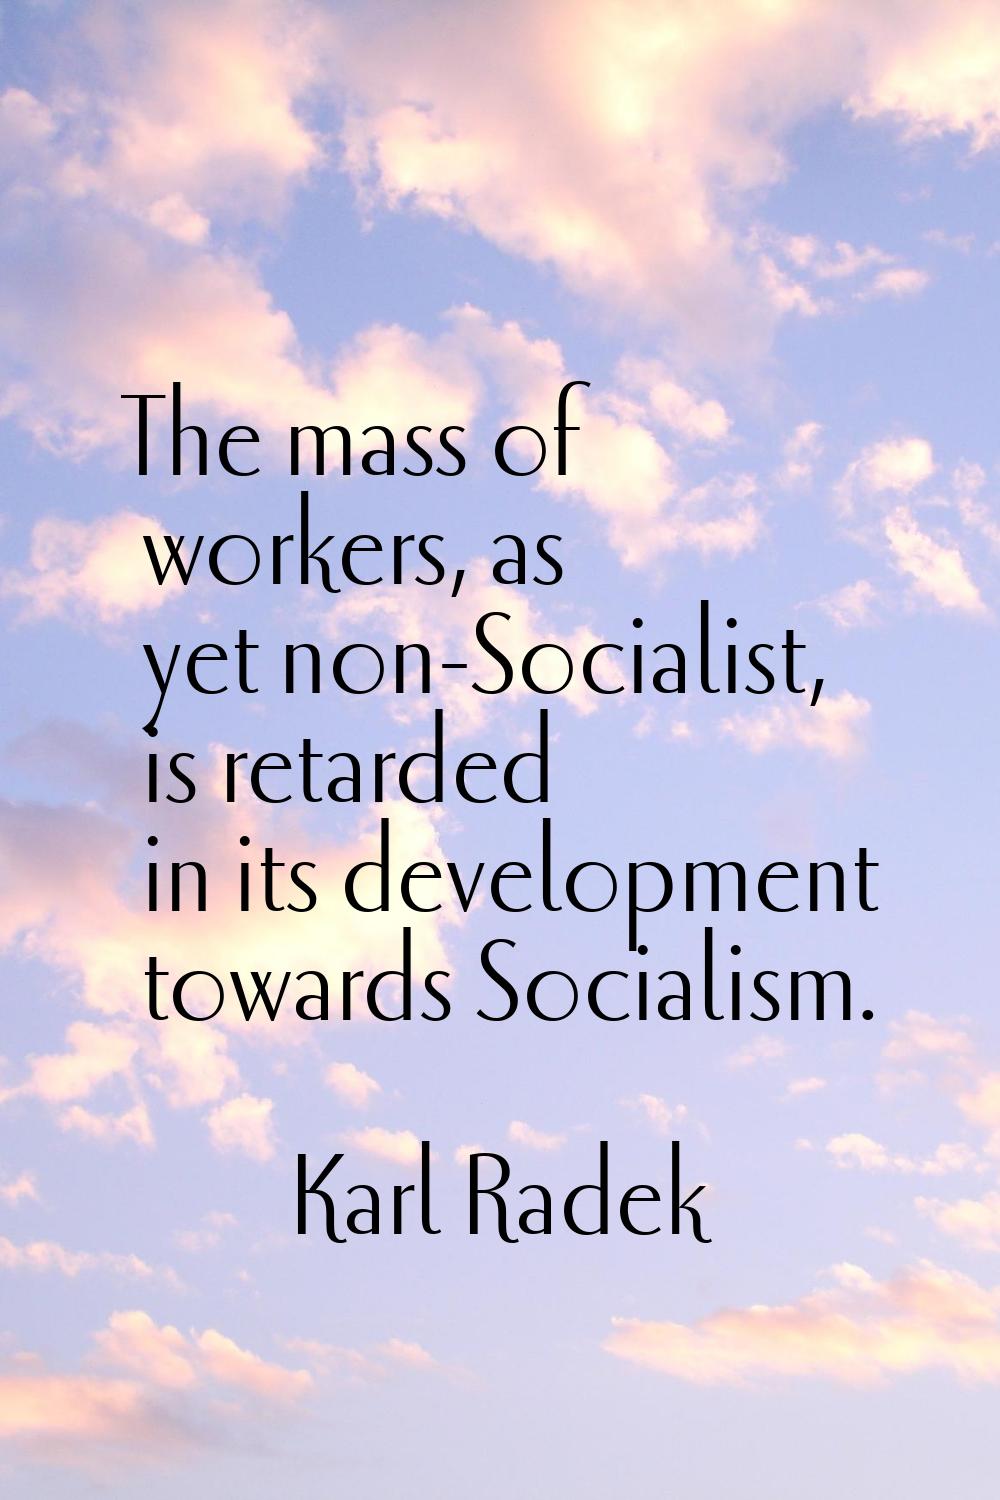 The mass of workers, as yet non-Socialist, is retarded in its development towards Socialism.